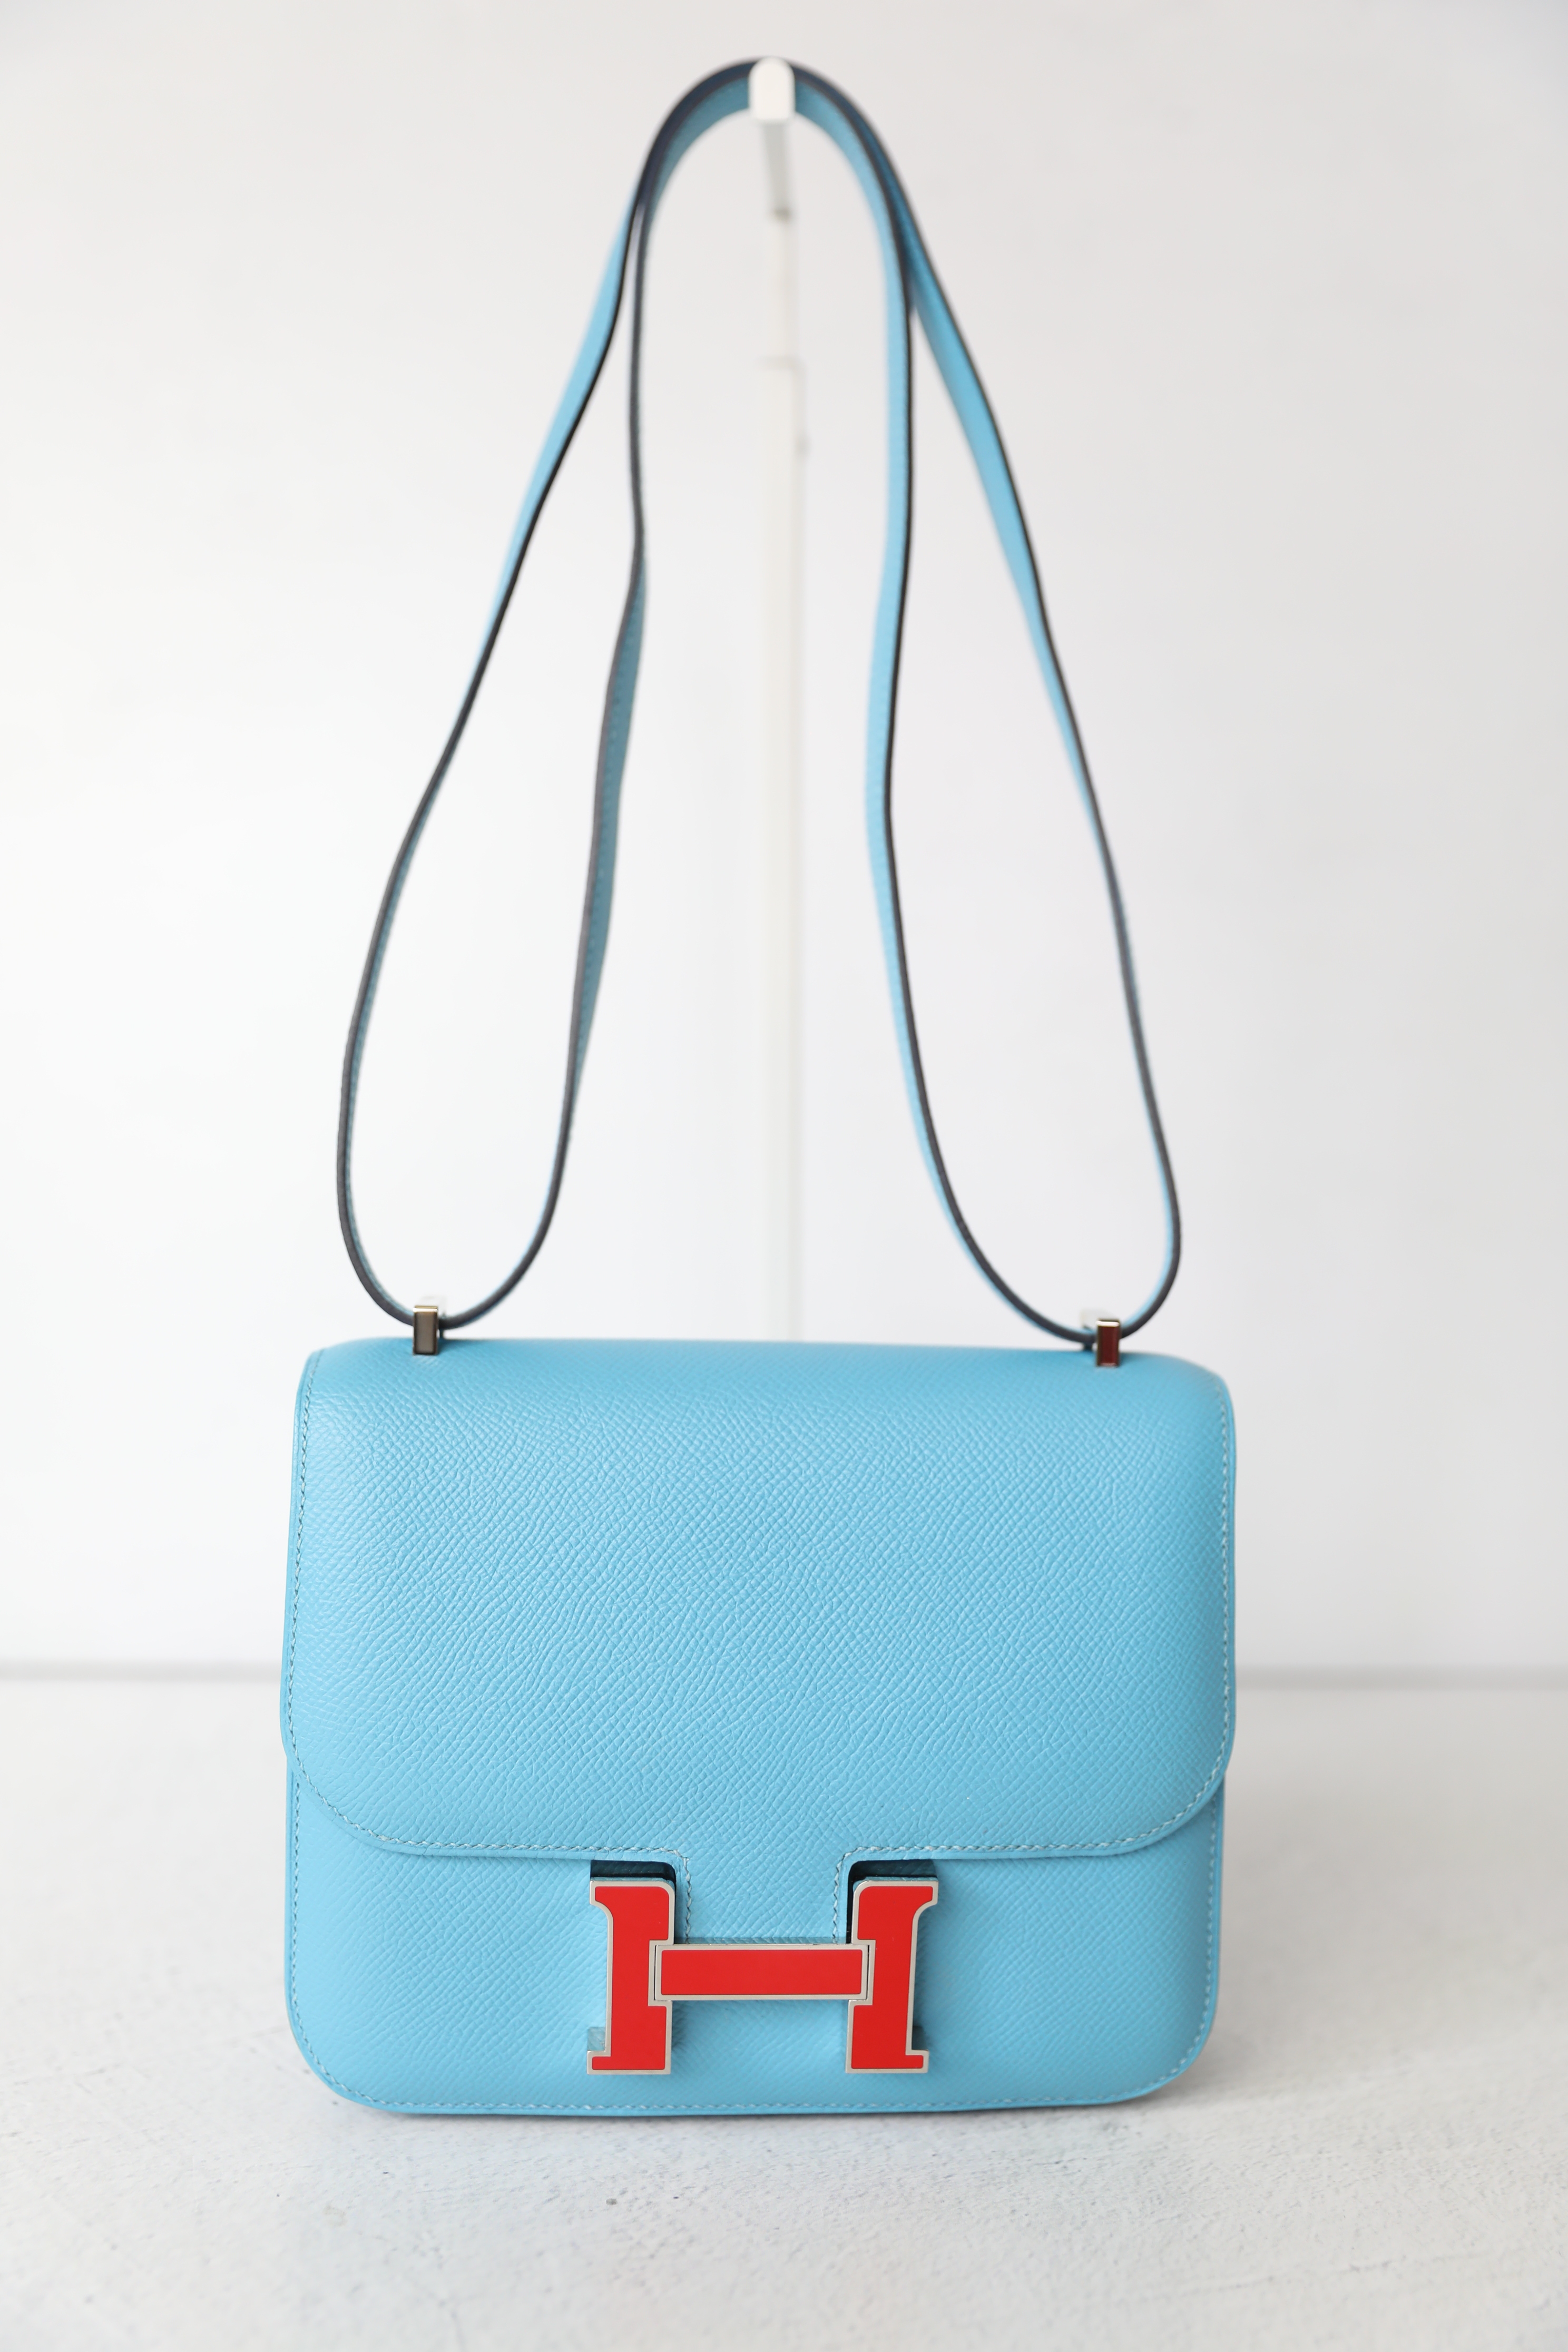 Hermes Constance 18, Blue Epsom Leather with Red and Palladium Hardware,  Preowned in Dustbag WA001 - Julia Rose Boston